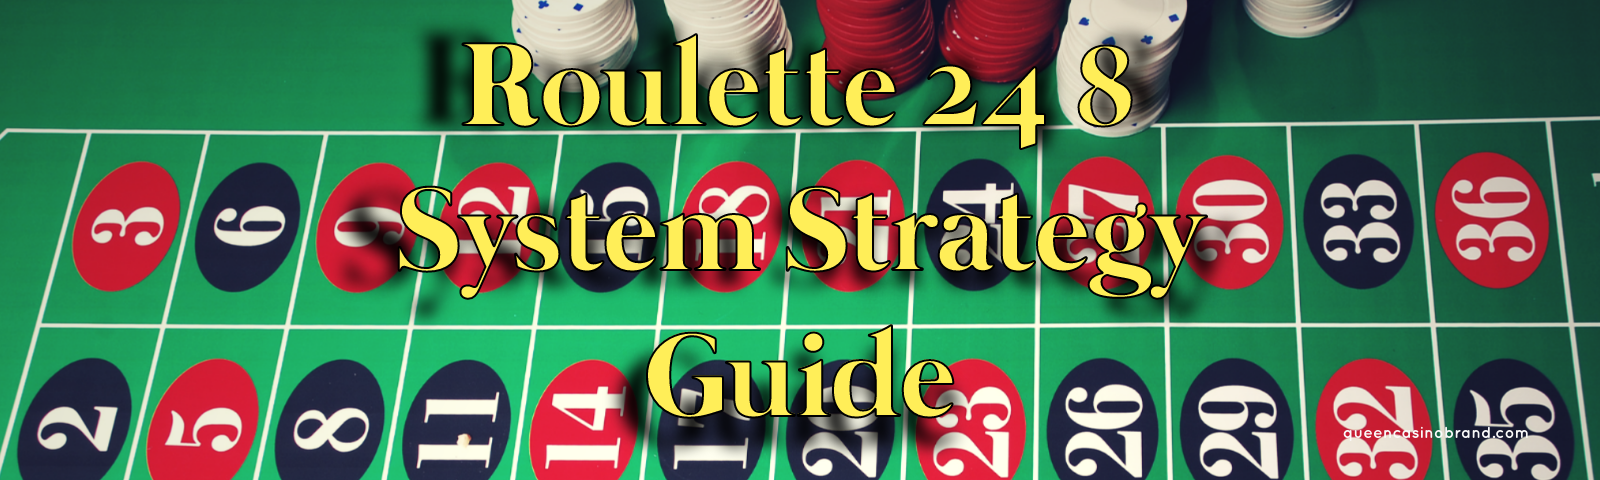 Roulette 24 8 System Strategy Guide